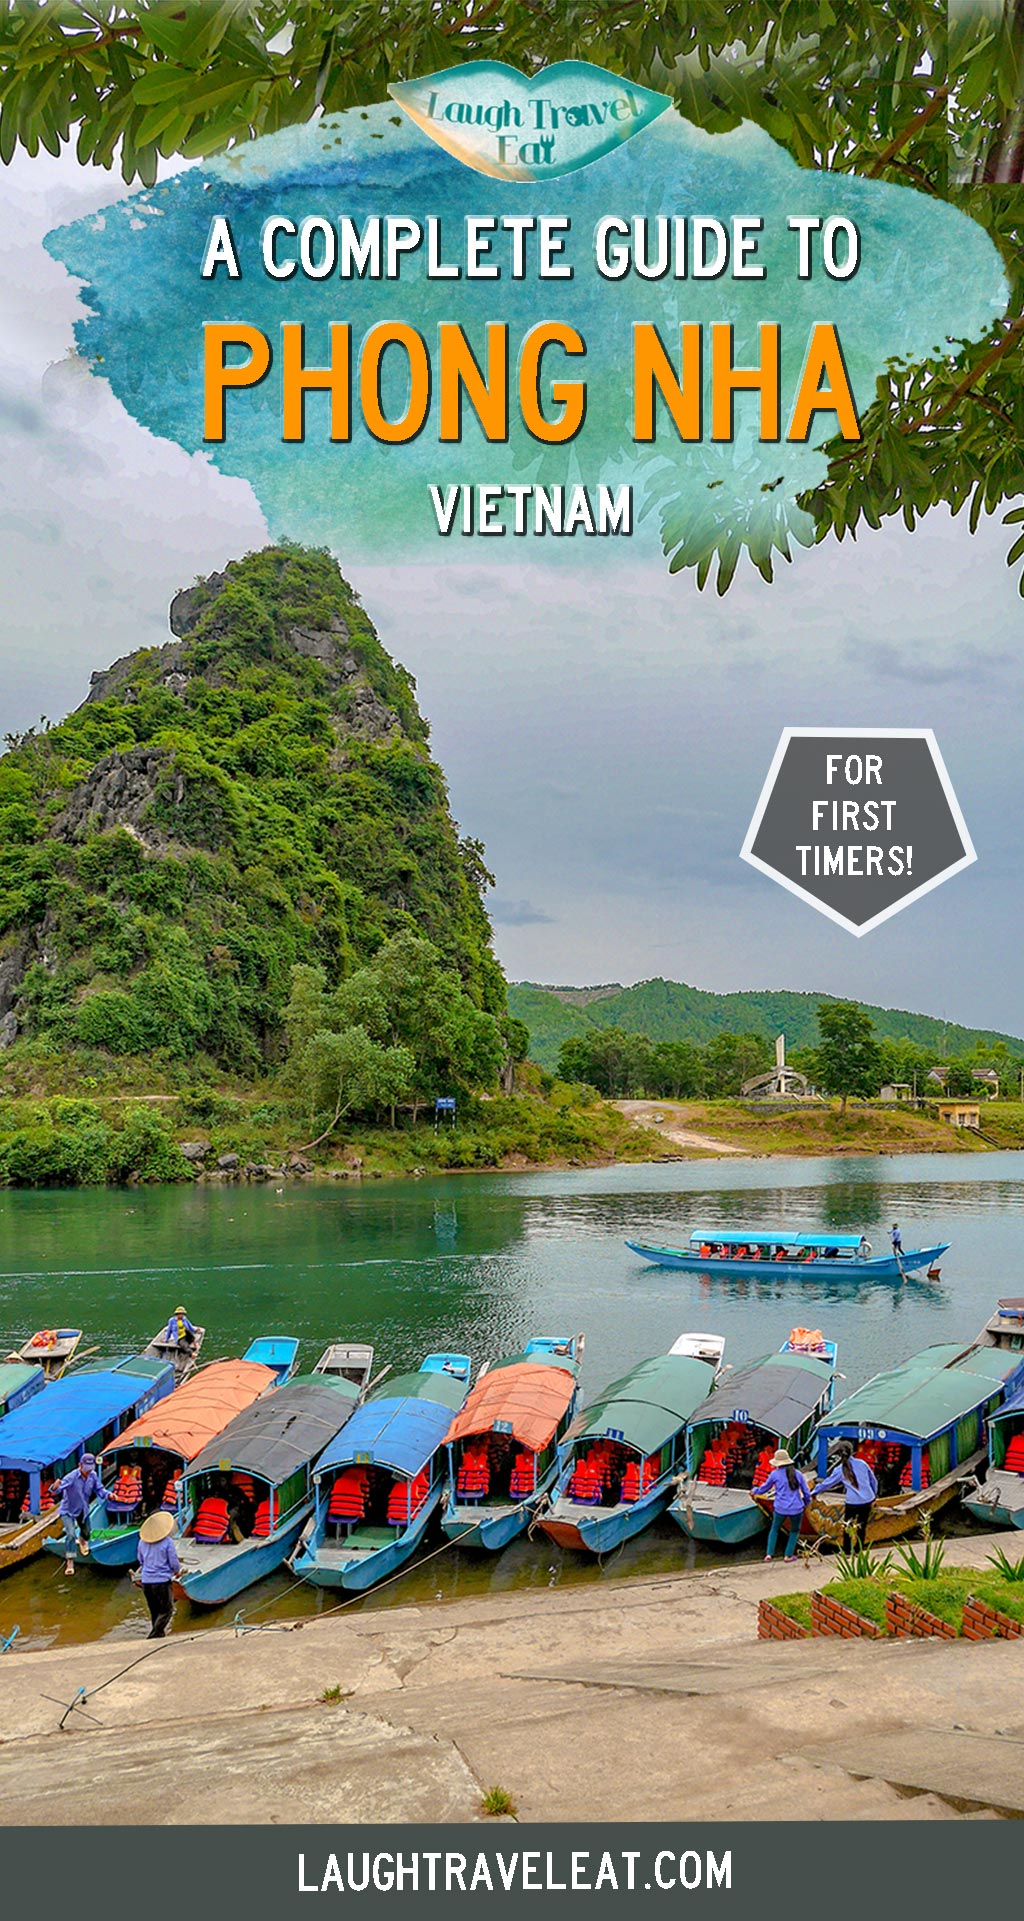 Phong Nha is a small town in north central Vietnam with one of the best cave structures in the world. Here's where to stay, what to eat, and how to visit these amazing caves #PhongNha #Vietnam